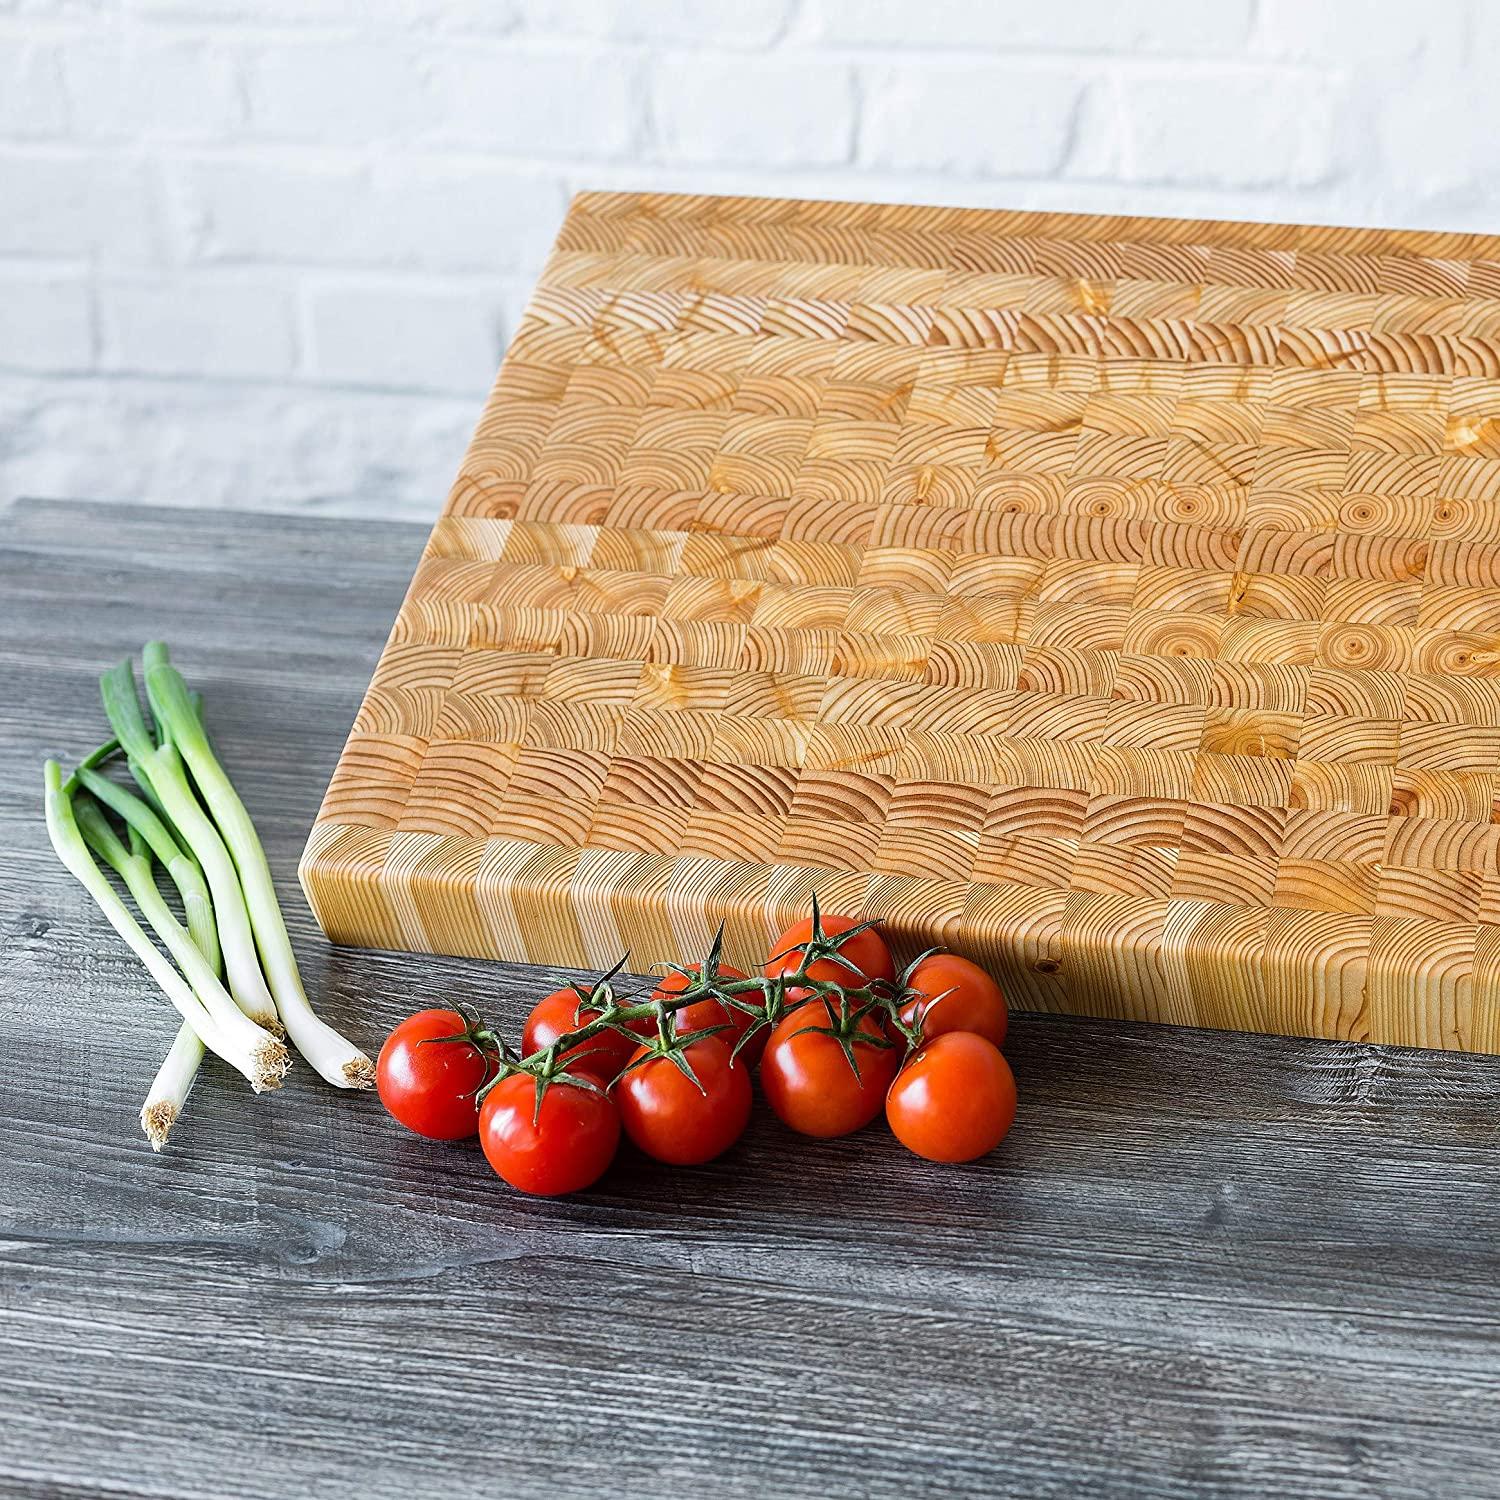 New find: Gorgeous vintage inspired, timber serving boards